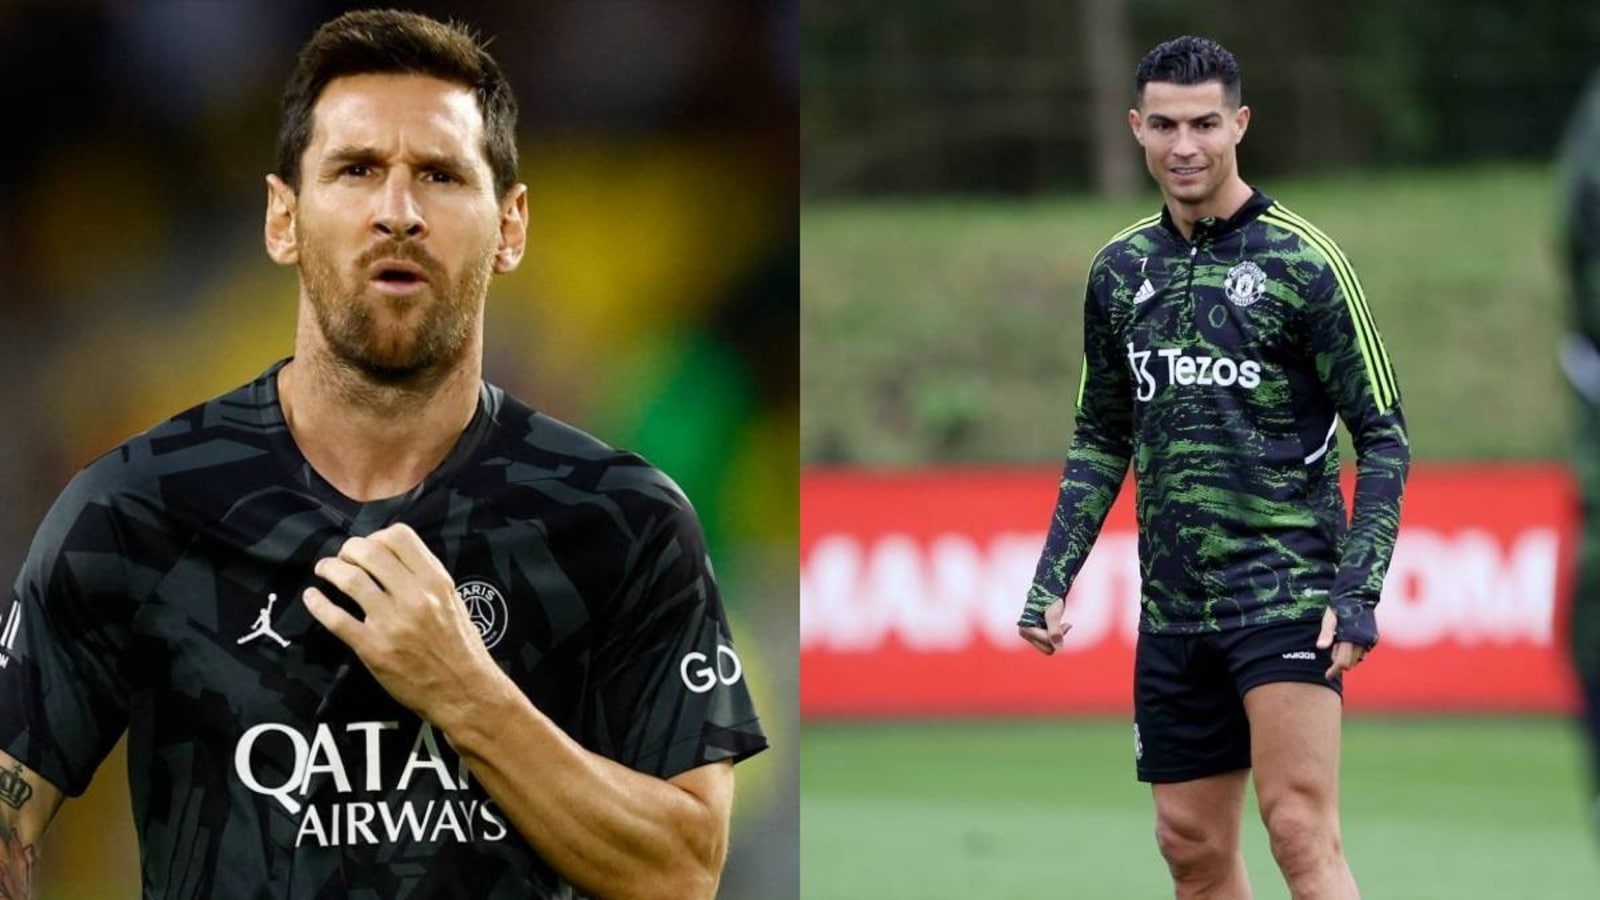 Cristiano Ronaldo Talks About His Relationship With Lionel Messi